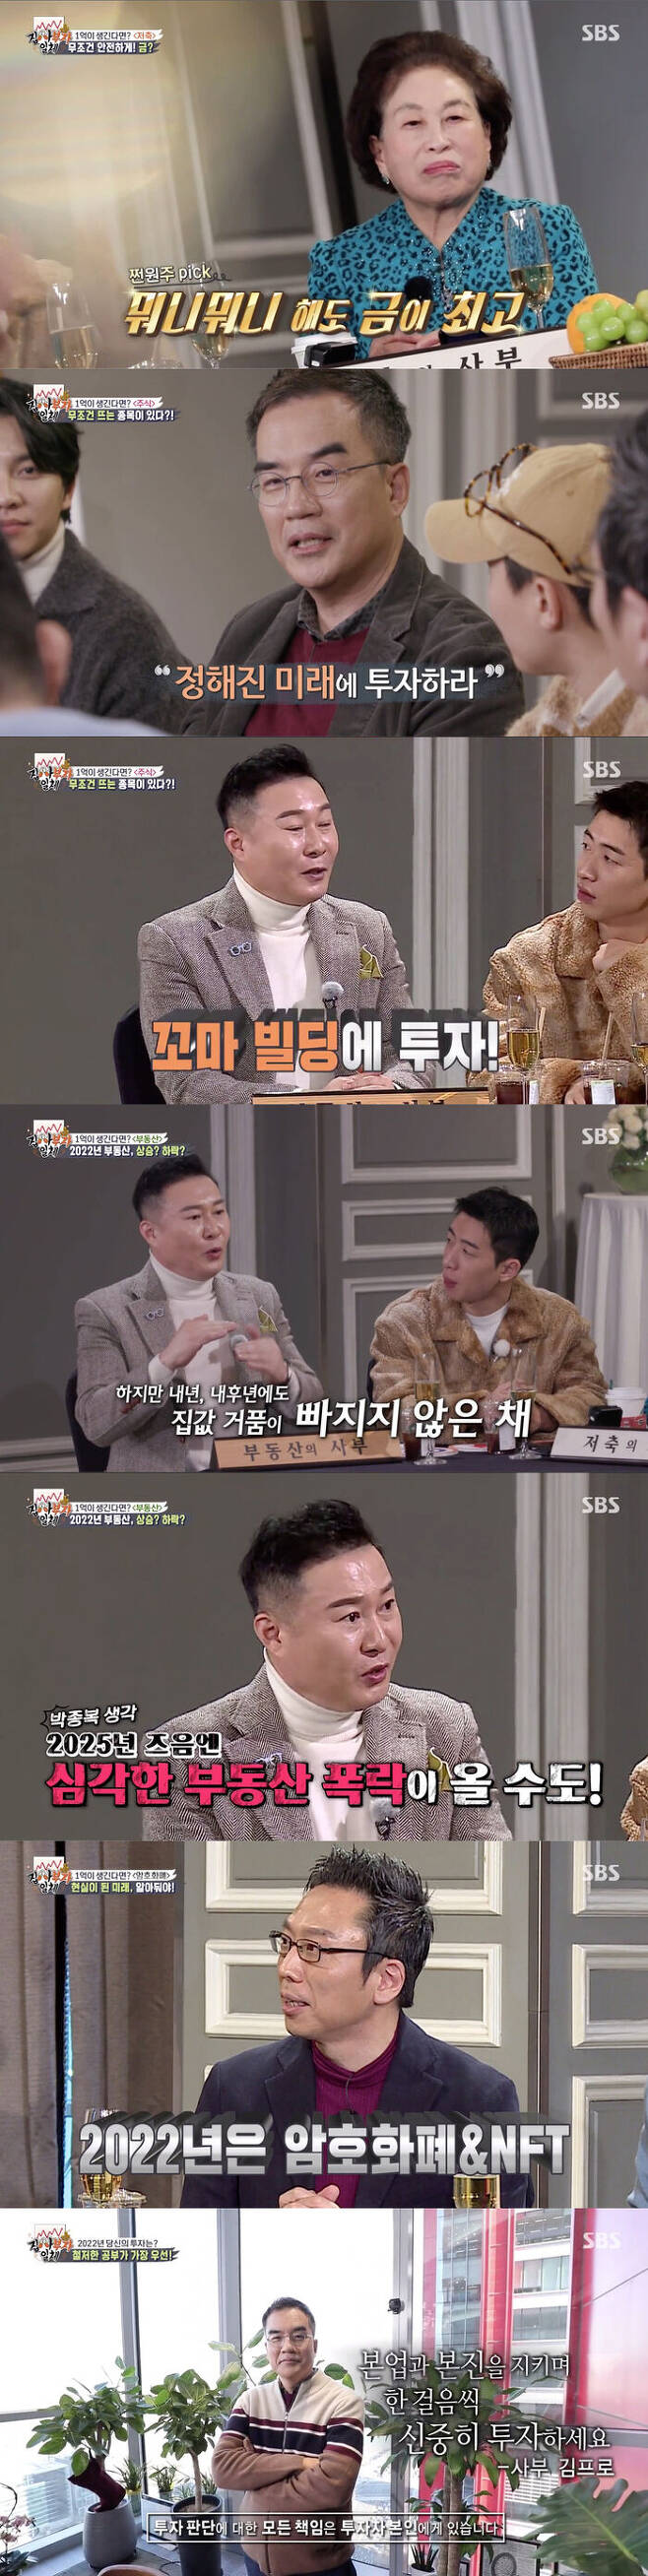 Experts from each field have revealed the secret to becoming rich.In SBS All The Butlers broadcast on the 16th, India experts discussed the right investment.On the day of the broadcast, the members asked where they would invest if they had 100 million won in assets.Gold does not disappear, but remains like a monument. He expressed his belief in gold, which has risen more than in the past.Kim said he would invest in stocks as expected. In particular, he advised, There are stocks that I wanted to buy.The members asked for specific events, and Kim said, Global funds will be attracted to eco-friendly projects.So, eco-friendly projects such as solar power, electric cars, and hydrogen cars will be launched. He also paid attention to the revival of K contents and attracted attention by paying attention to the drama, which is a sustainable content.I will buy a small building without any condition, said Park Jong-bok, the master. I will invest because I can afford housing and additional income.So, Master Kim showed interest in whether it is possible, and in the story of Master Park, who said that he could live unconditionally, he said, Do you solve the residence and get a monthly rent? And then he said, I will cancel investing in K contents.And the masters and members wondered what the real estate market would be like in 2022, and all but Master Park Jong-bok expected a decline in real estate in 2022.But Master Park predicted a modest uptrend.It will be completely divided into the rising and falling areas, and the climbing area will be beyond imagination, he predicted.In addition, Park surprised everyone by predicting that if the price bubble of the real estate market next year or next year does not fall, a more serious real estate collapse may come after 2025.He advised, The house for living is not a big drop in strength and is strong. Kim Pro-Made also agreed with Master Park, saying, Residential real estate in Korea is a favorable asset.Master Kim Seung-ju said he would invest 100 million won in coin and NFT without worrying.This is the starting point for a big growth, he said. We have resigned as a representative director and all-in-one with cryptocurrency companies, but we assume that the value of future business will change.Kim said, Currently, bitcoin is 60 million won, but it will not be the price in 10 years.I do not think it should be all in all of my assets in such a risky market, he said. I think it is not possible to invest in virtual currency and NFT.Virtual currency is definitely a potential investment, but investment after studying is made so that investment can be made, not speculation, said Kim Seung-joo, the master. I do not think I should study more when investing in stocks.Everyone is interested only in specific investment-related information, but they are indifferent to real information such as technical value. He emphasized the importance of investing in virtual money.Finally, Kim said, We have to invest in the main place. We can invest in the right place because we are doing our life for the rest of our lives.